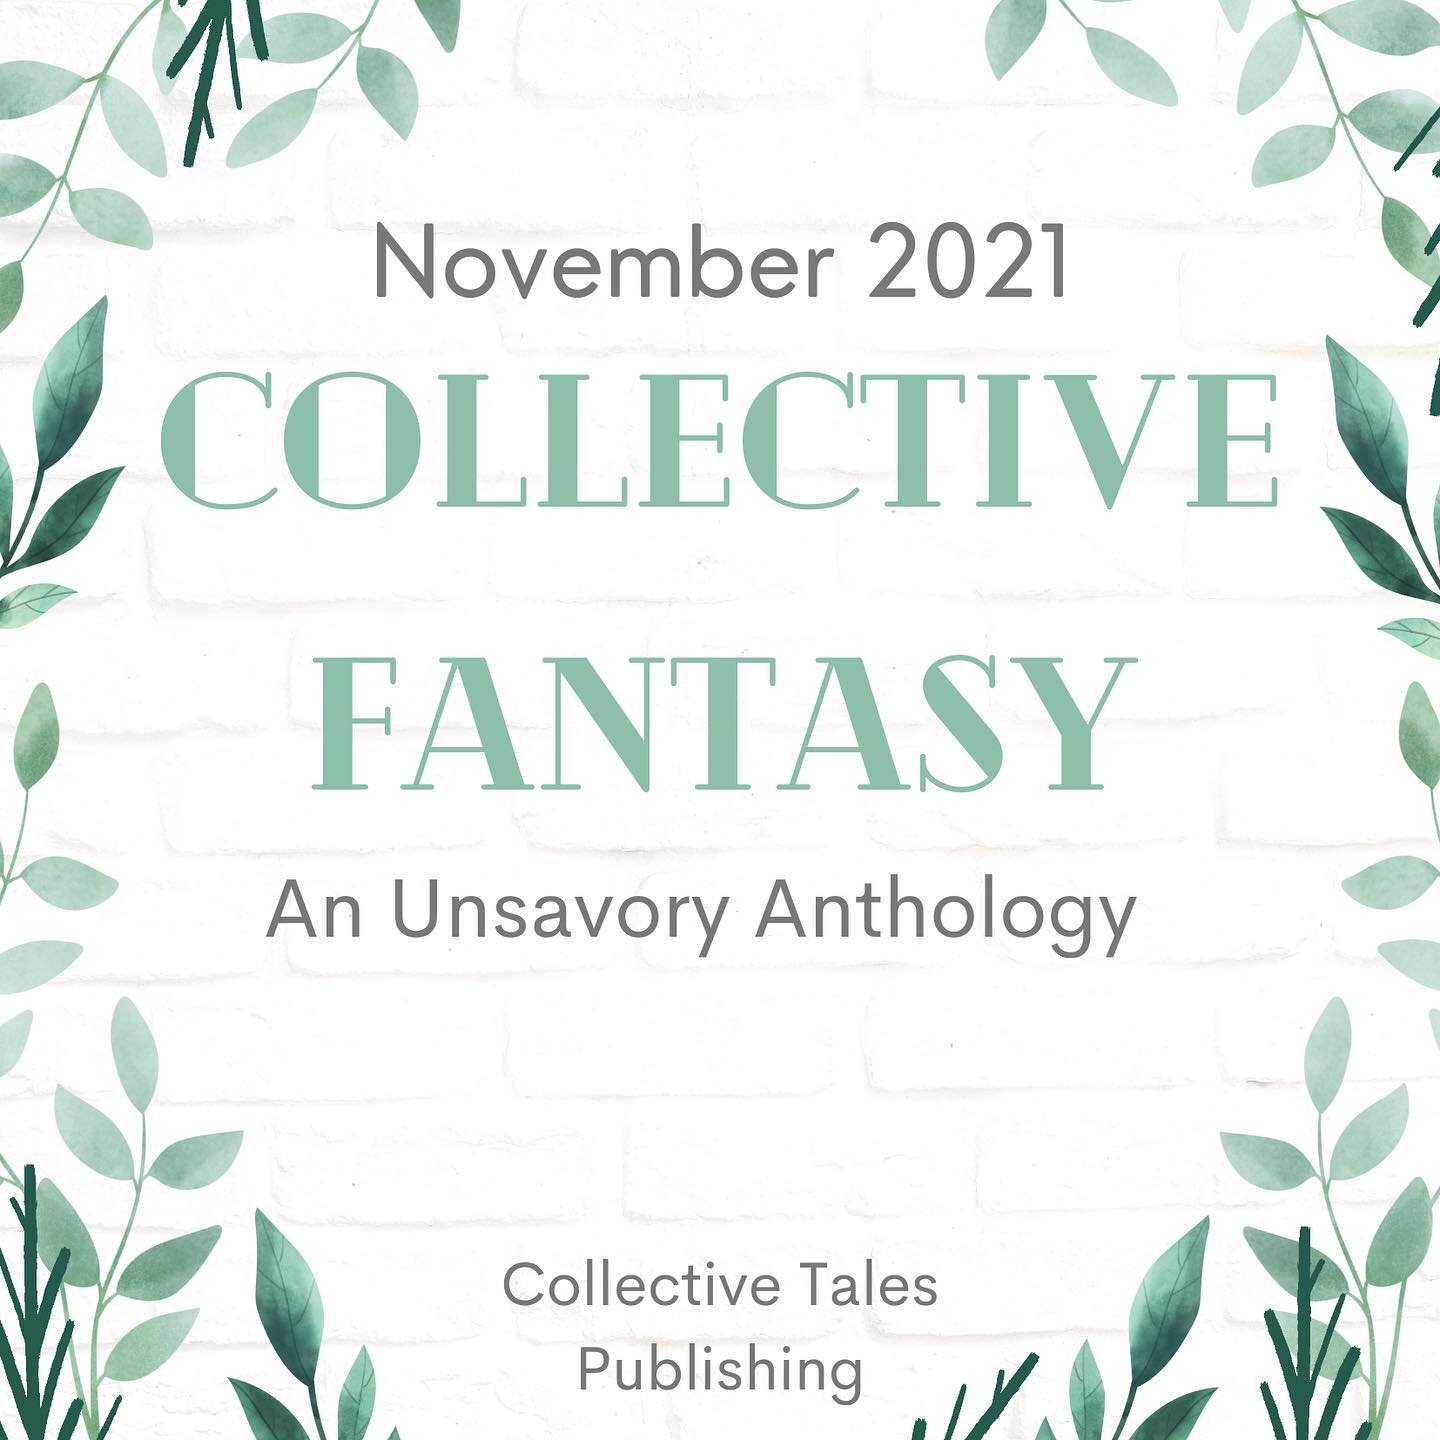 Collective Fantasy comes will be here November! ⚔️ 

From @collective_tales_publishing 

#fantasyart #fantasybooks #fantasy #collectivefantasy #collectivetales #bookstagram #bookrecommendations #bookish #writersofinstagram #writingcommunity